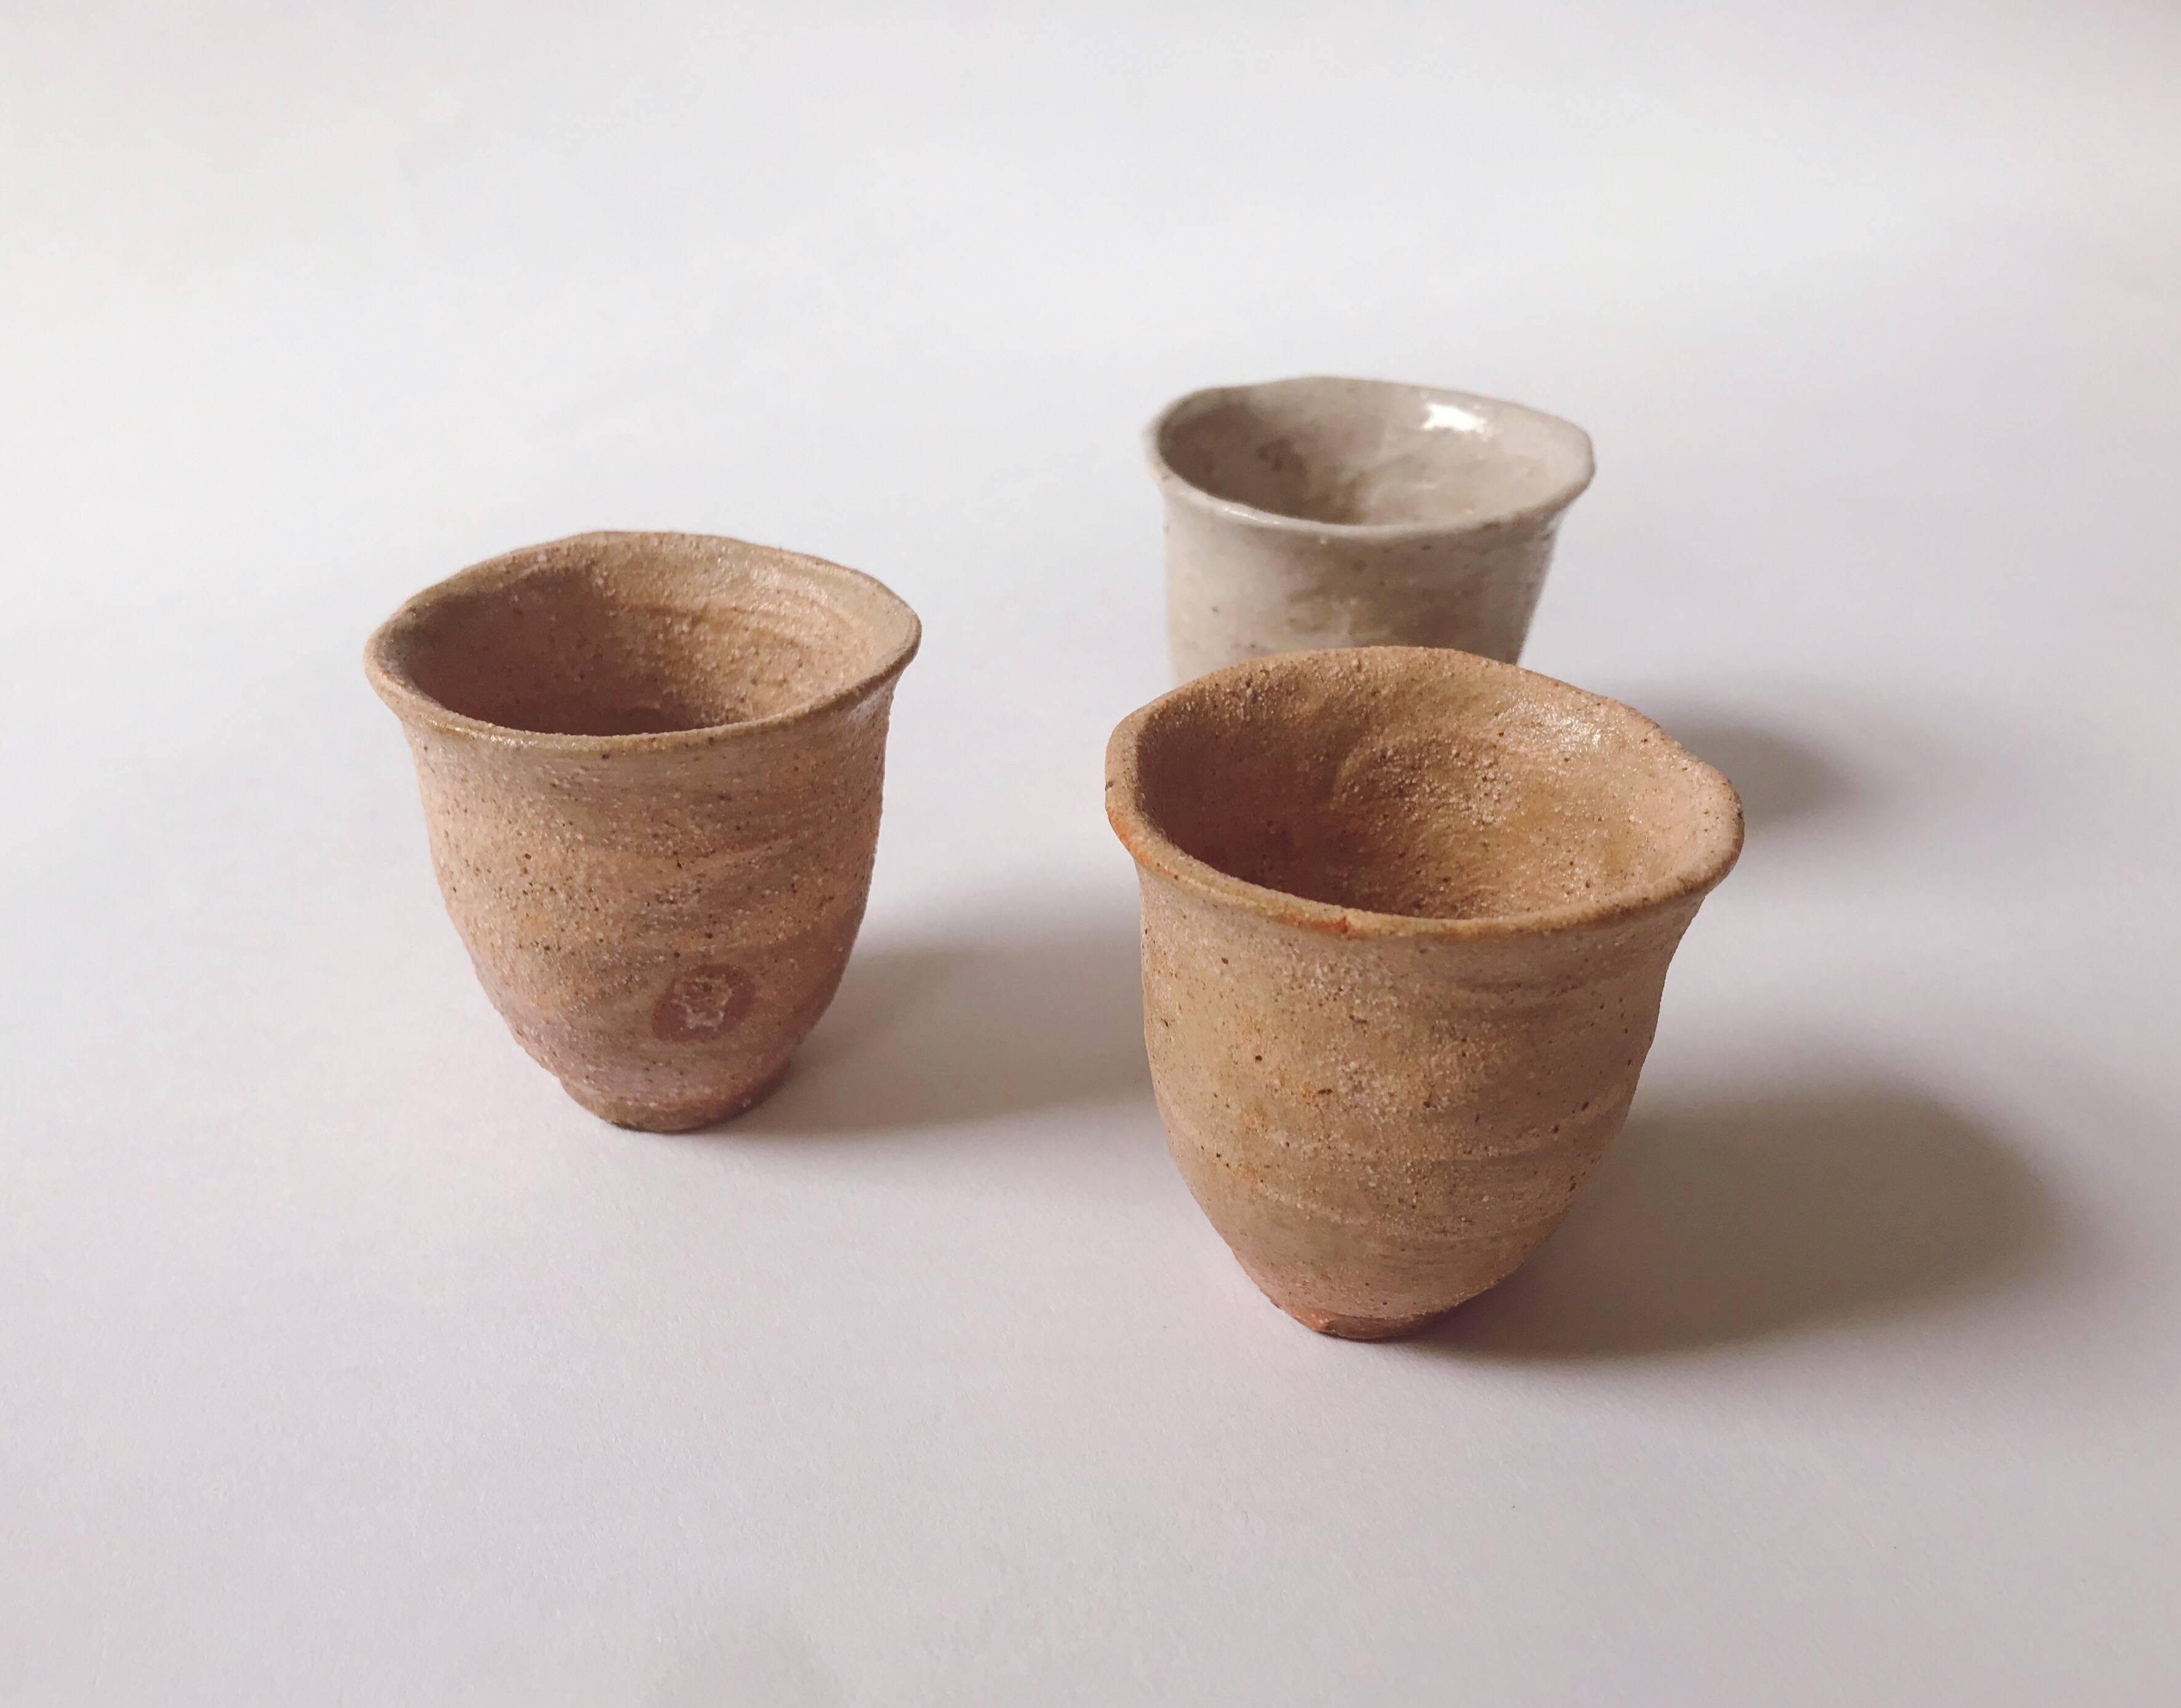 This set of three Japanese ceramic cups is by Shiro Shimizu, from his famous Kyoto studio. Shown in our Tea Ceremony exhibition which opened in May 2018.

The grandson of celebrated late ceramicist Uichi Shimizu, Shiro Shimizu hails from a lineage